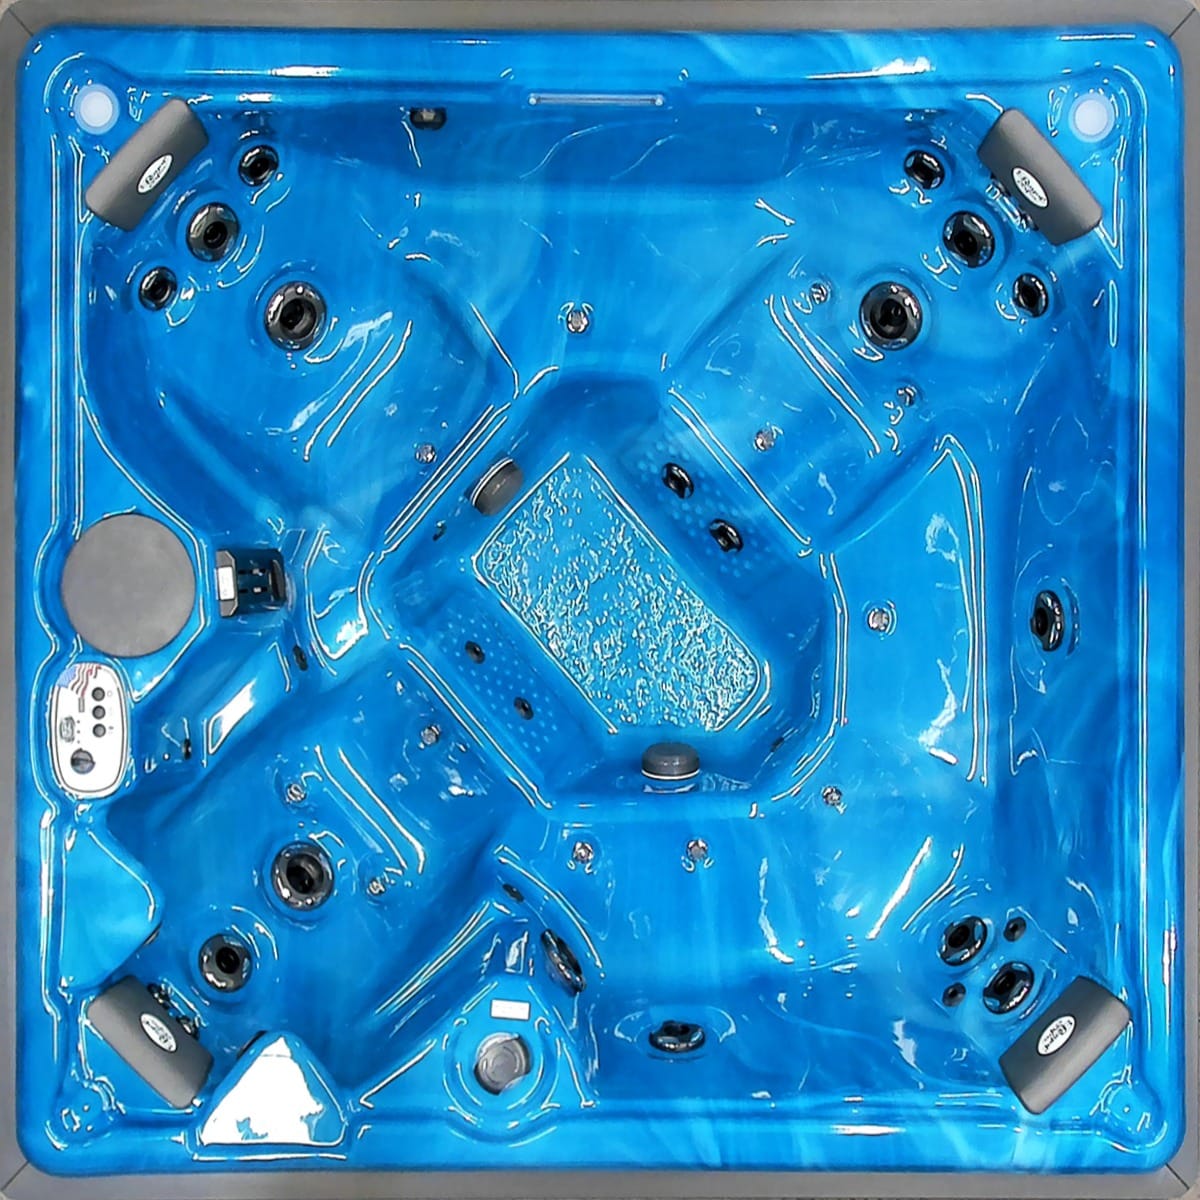 Hydrotherapy Hot Tub 6 Person Capacity Made In The Usa